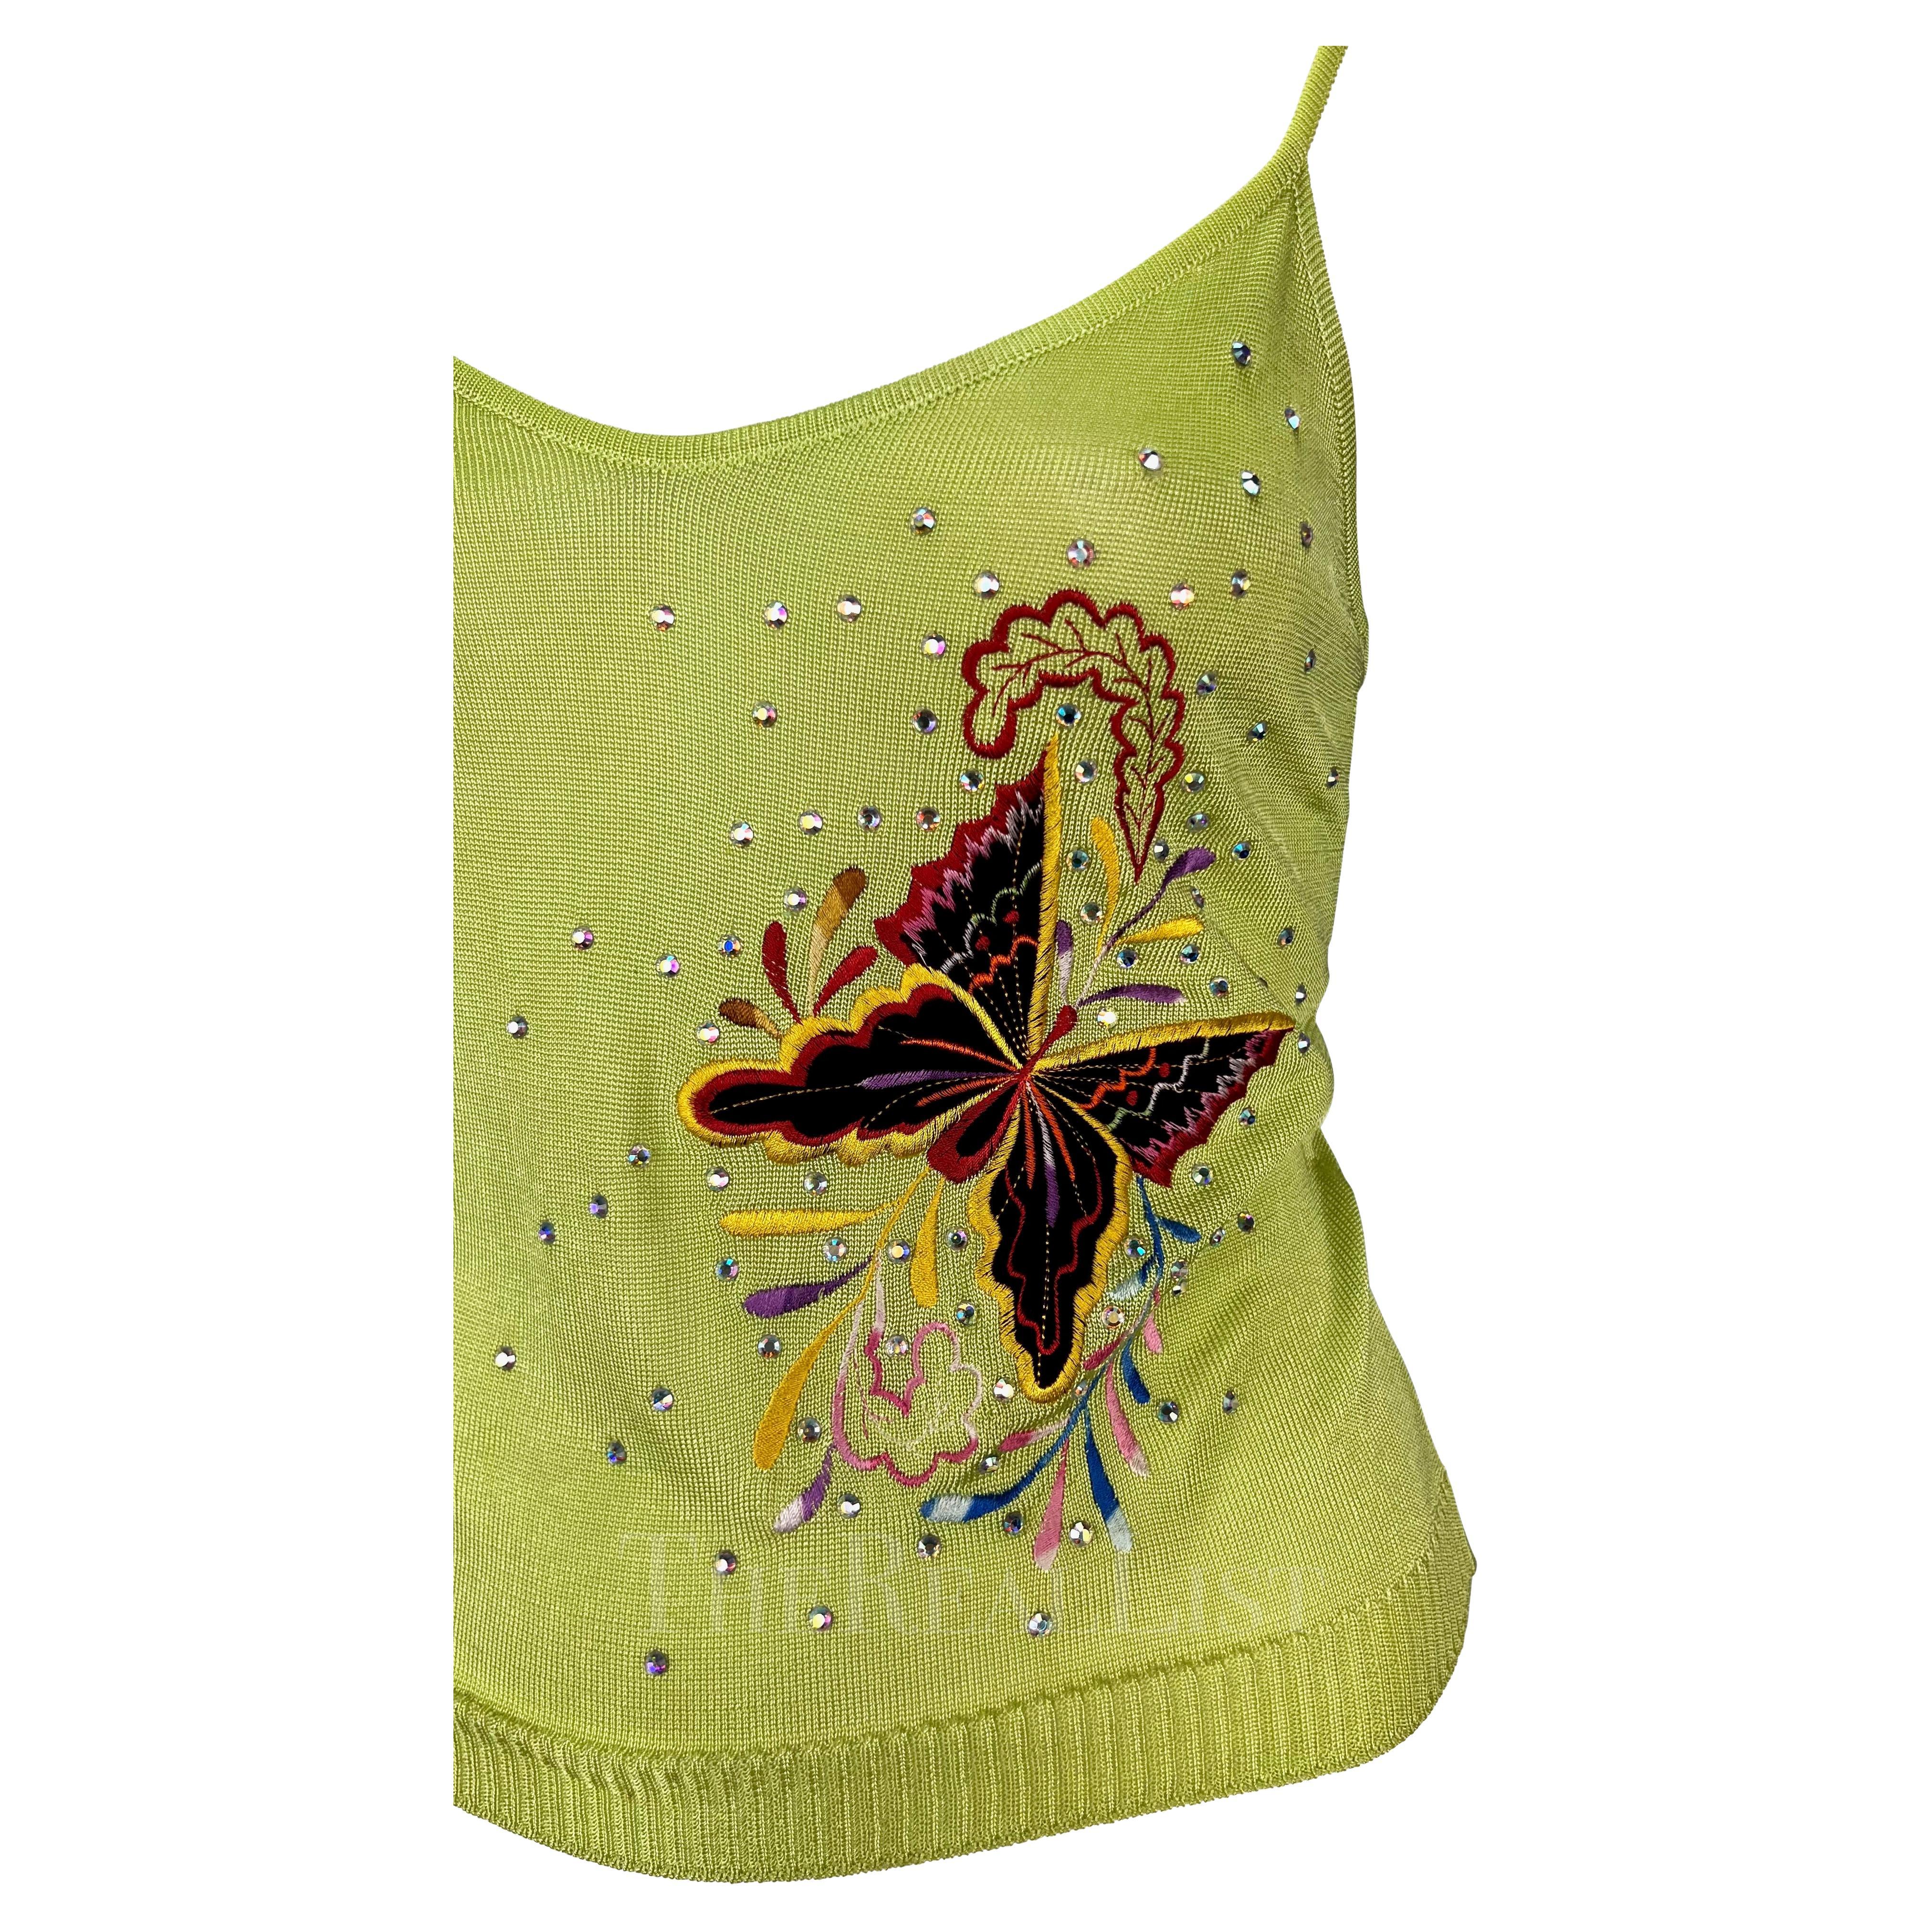  S/S 2002 Christian Dior by John Galliano for Butterfly Embellished Knit Tank Top  Pour femmes 